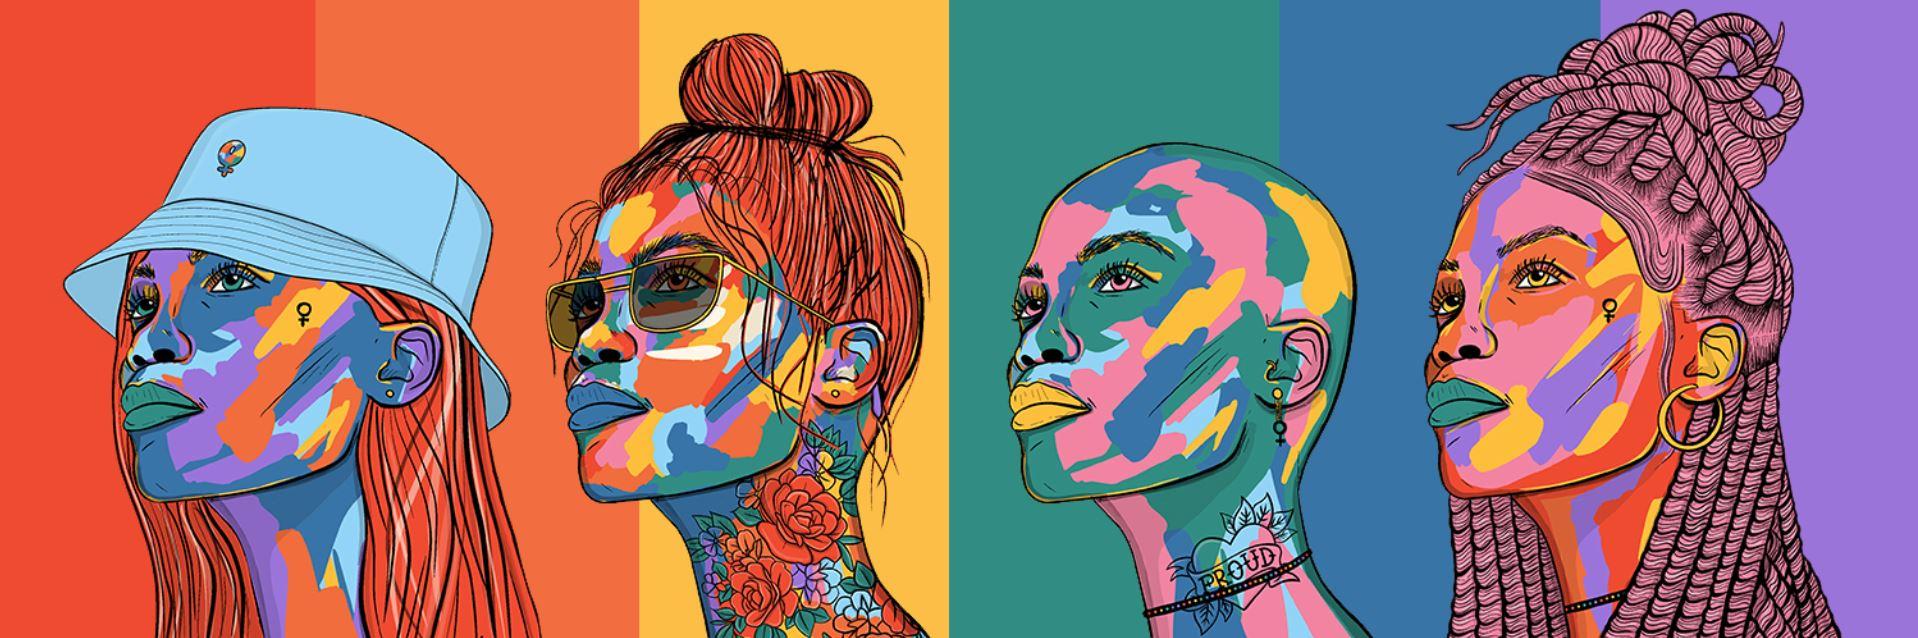 Colorful art pieces from Not Your Bro NFT project